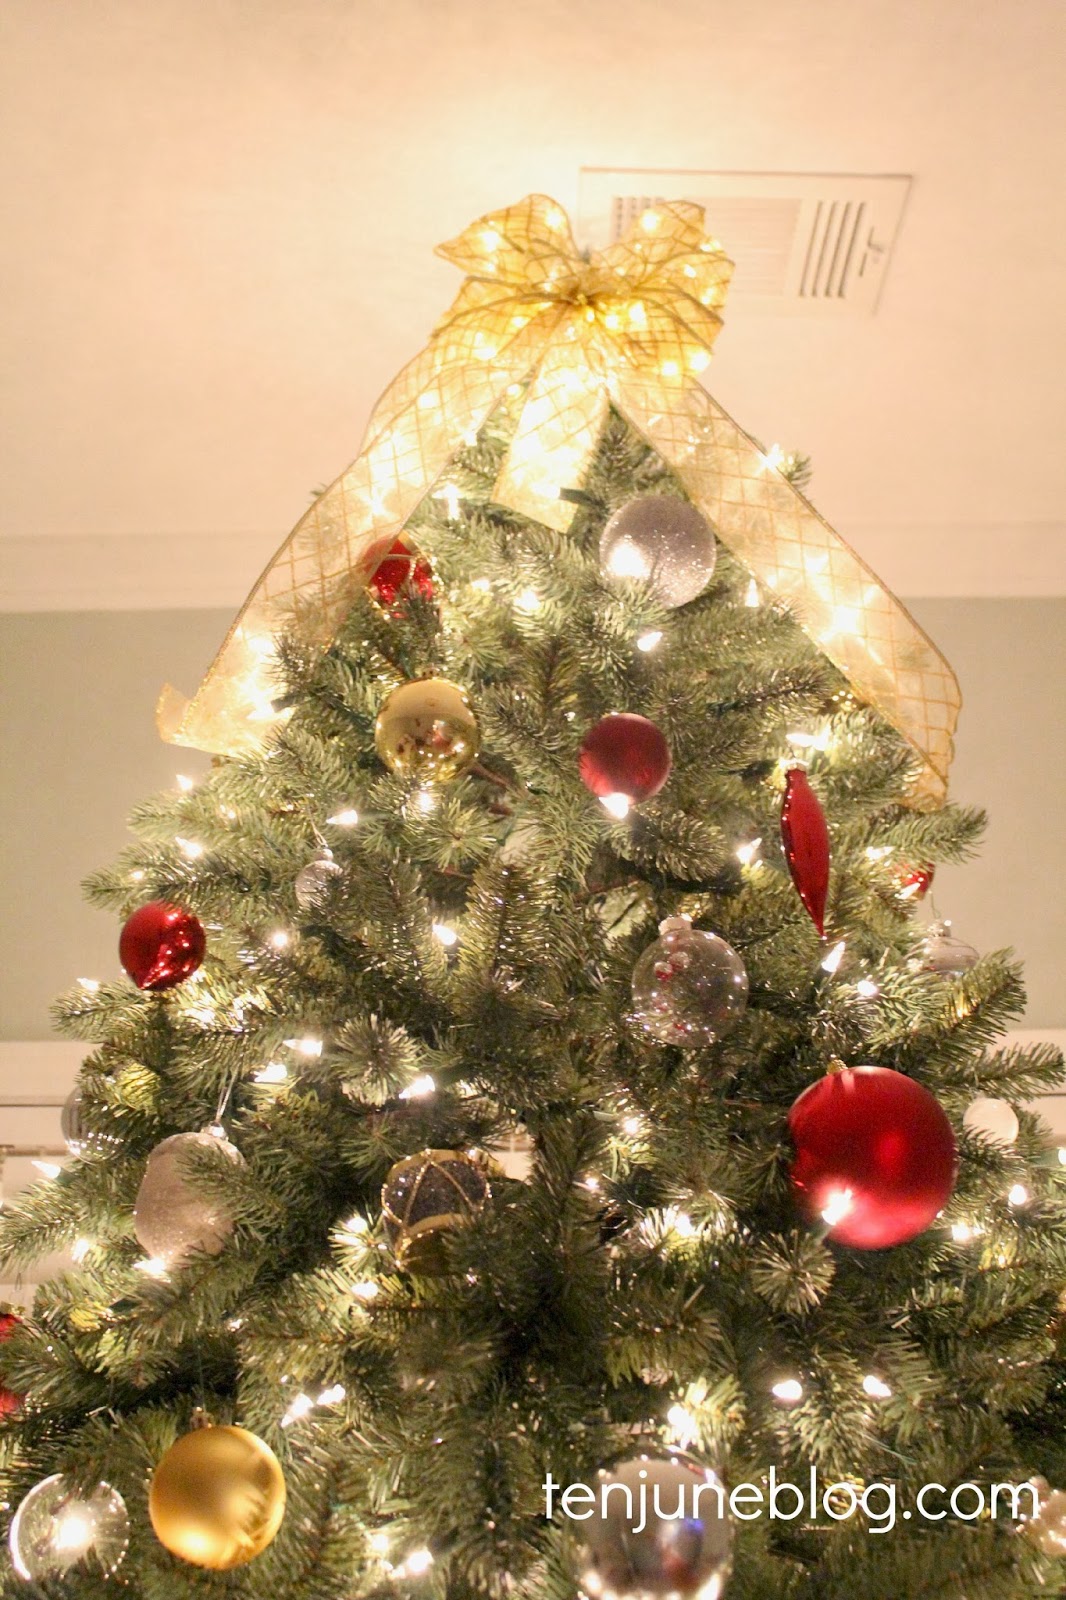 Ten June: Red + Silver + Gold Christmas Tree